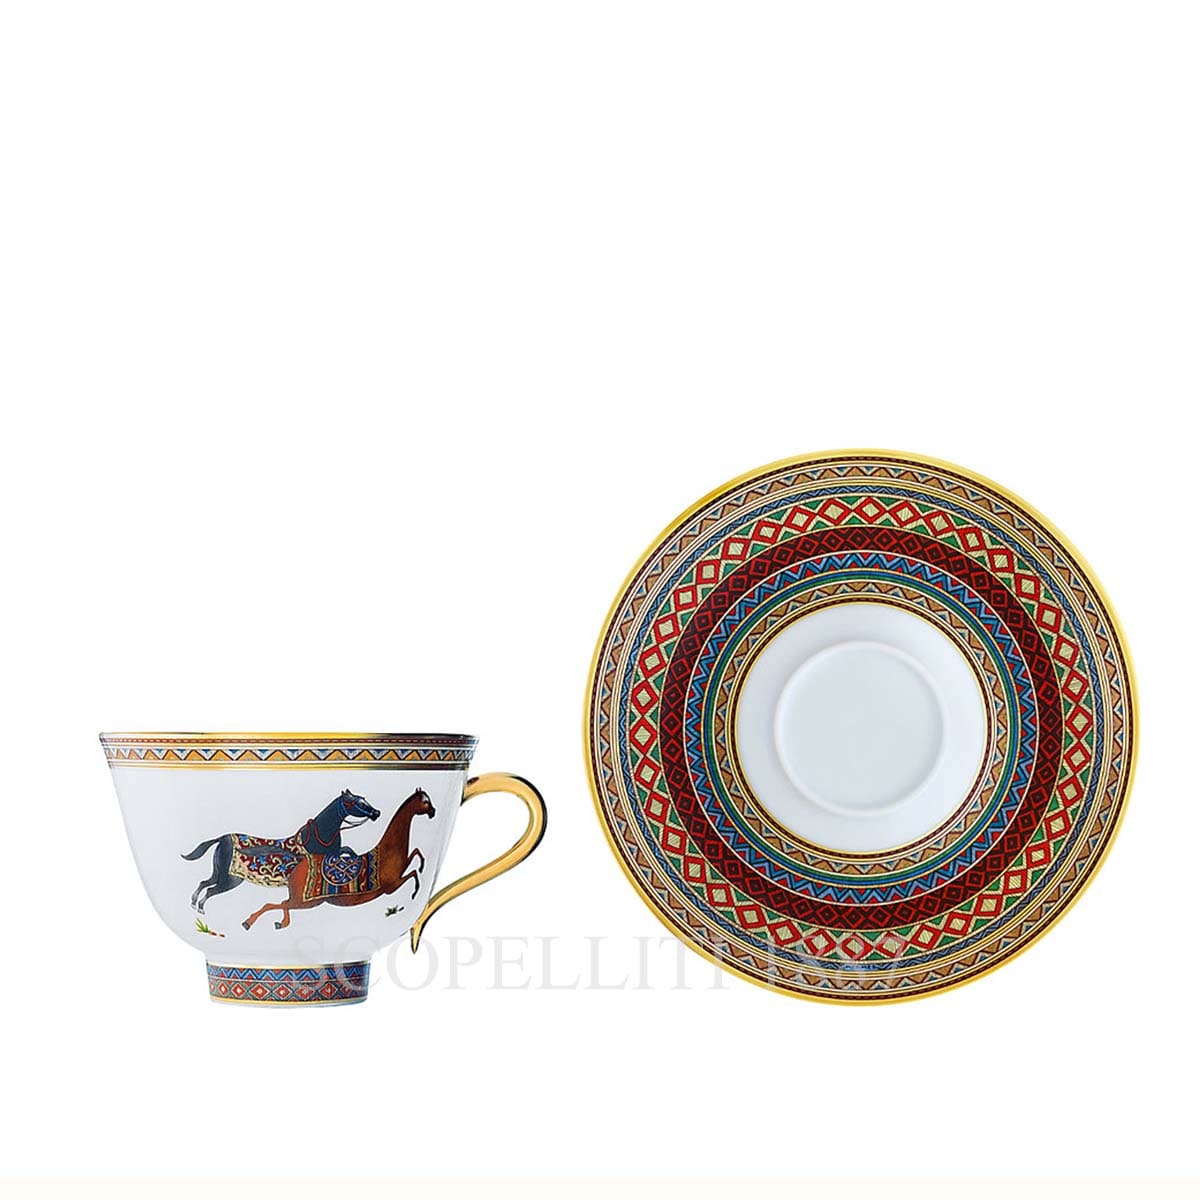 Hermes 2 Tea Cup And Saucer N 1 Cheval D Orient Scopelliti 17